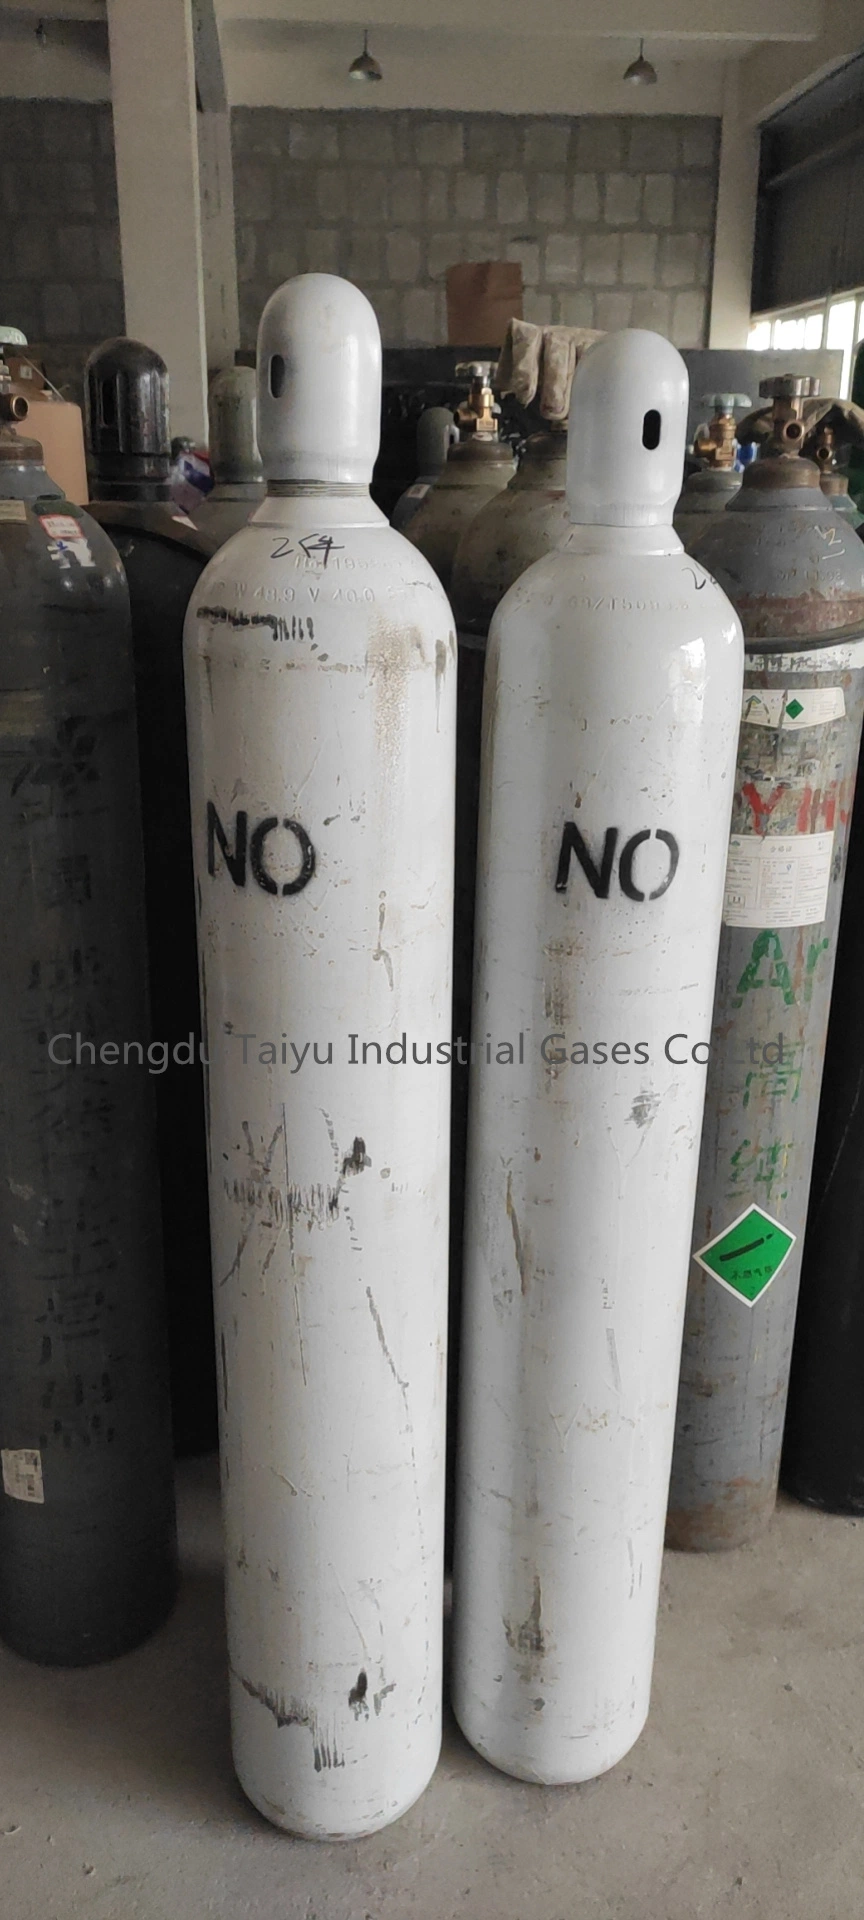 Original Factory High Purity 99.9% No Gas Nitric Oxide Medical Gas 1600L Filled in 47L Cylinder